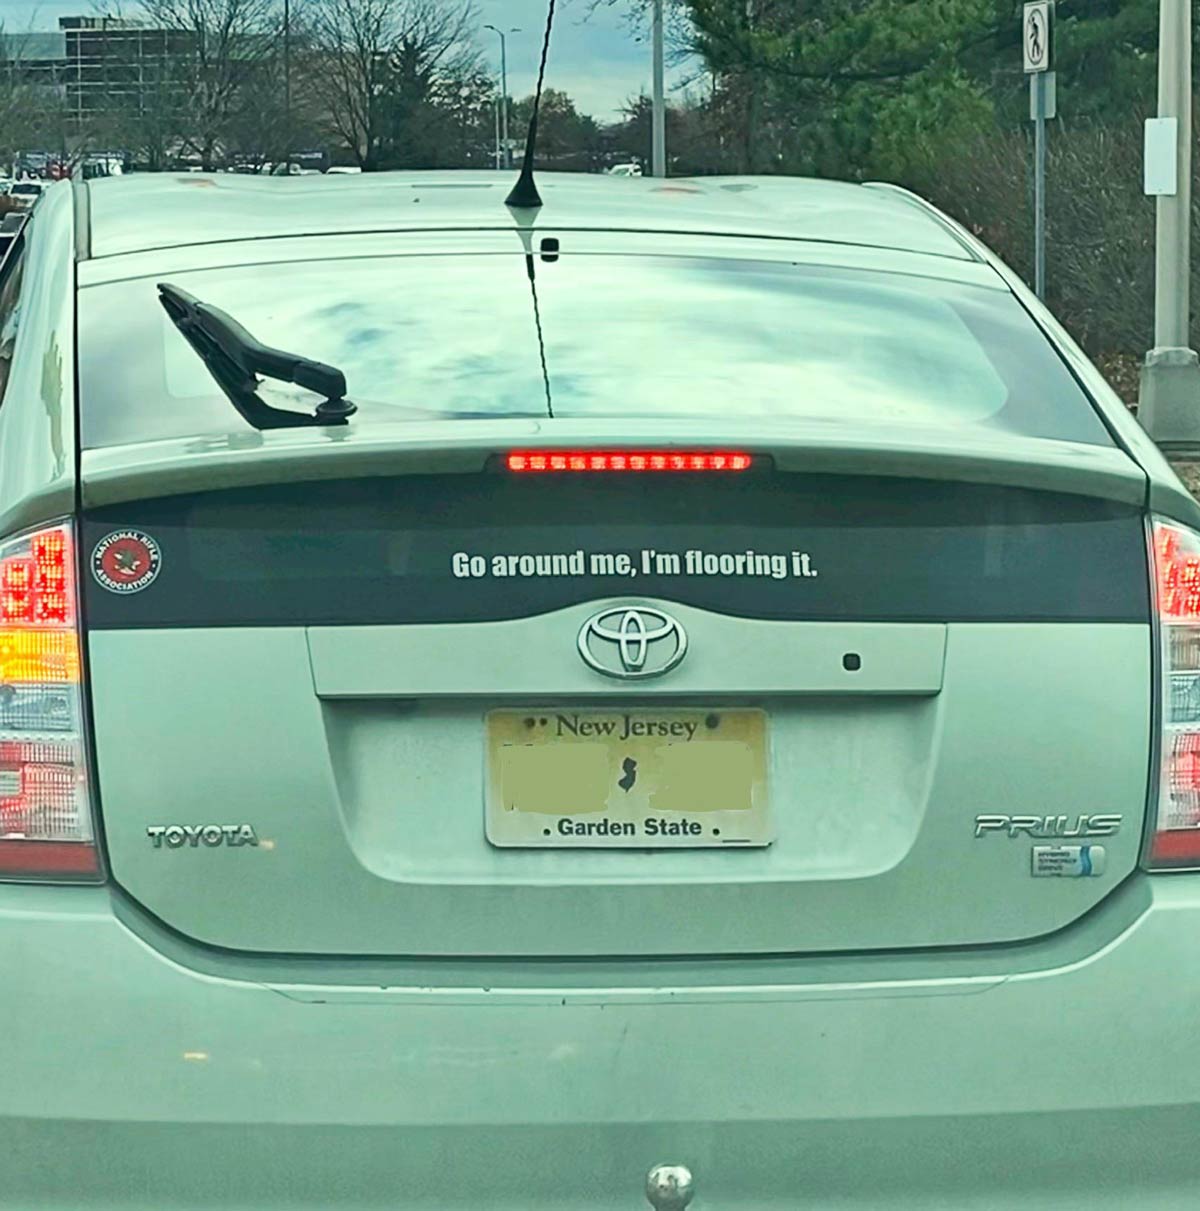 This bumper sticker on a Prius